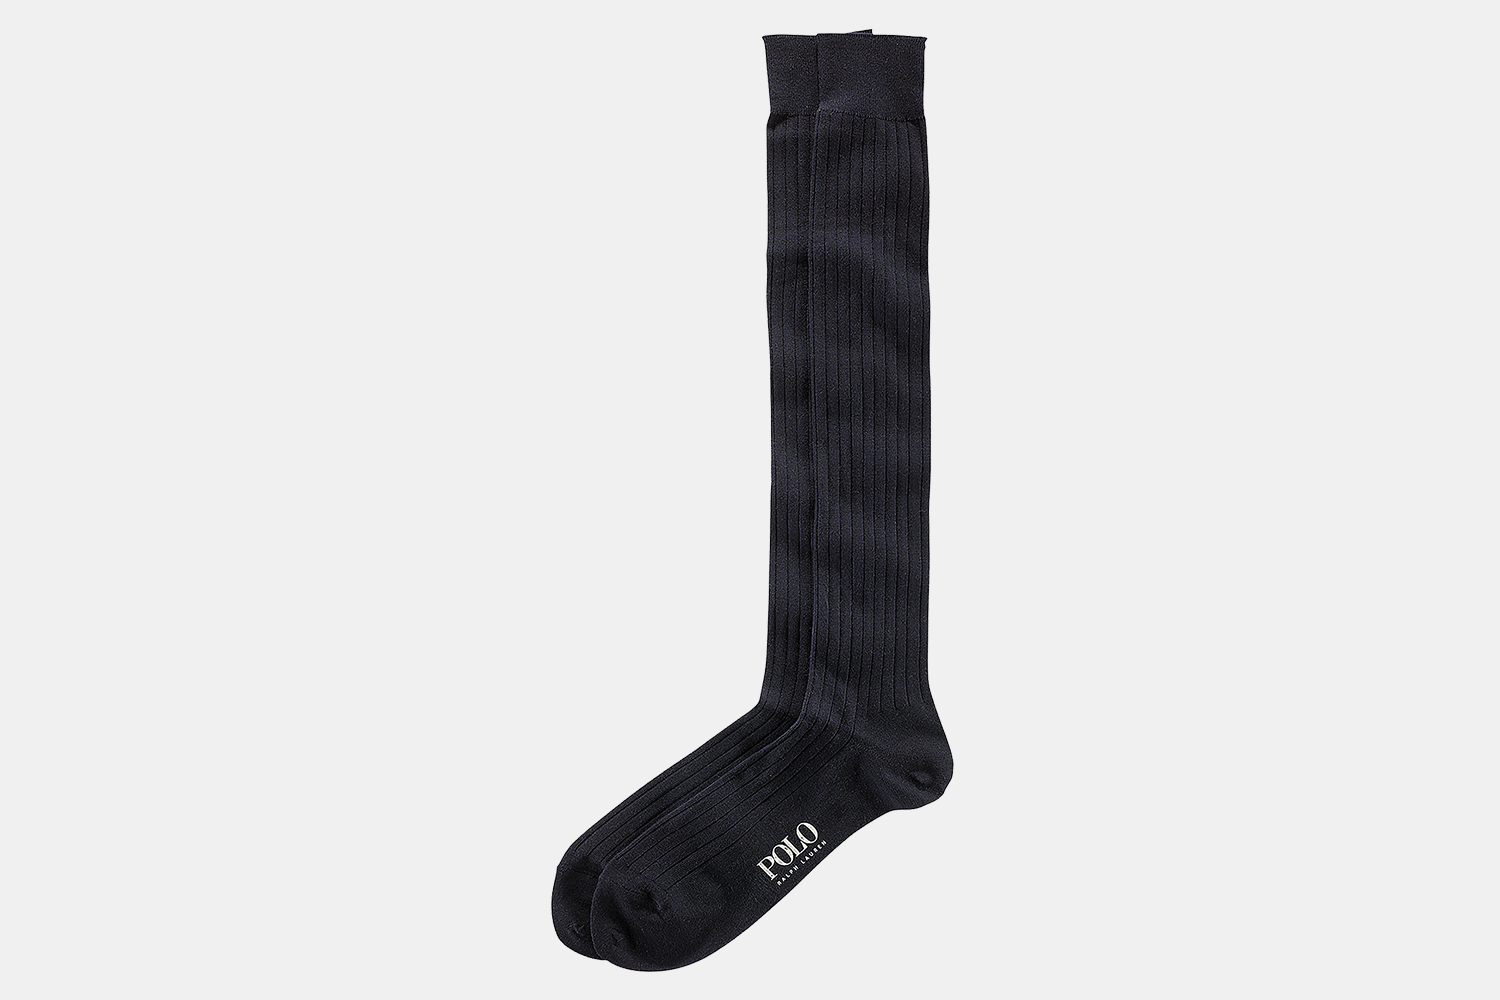 5 Pairs of Over-the-Calf Socks for Men (and Prince Harry) - InsideHook